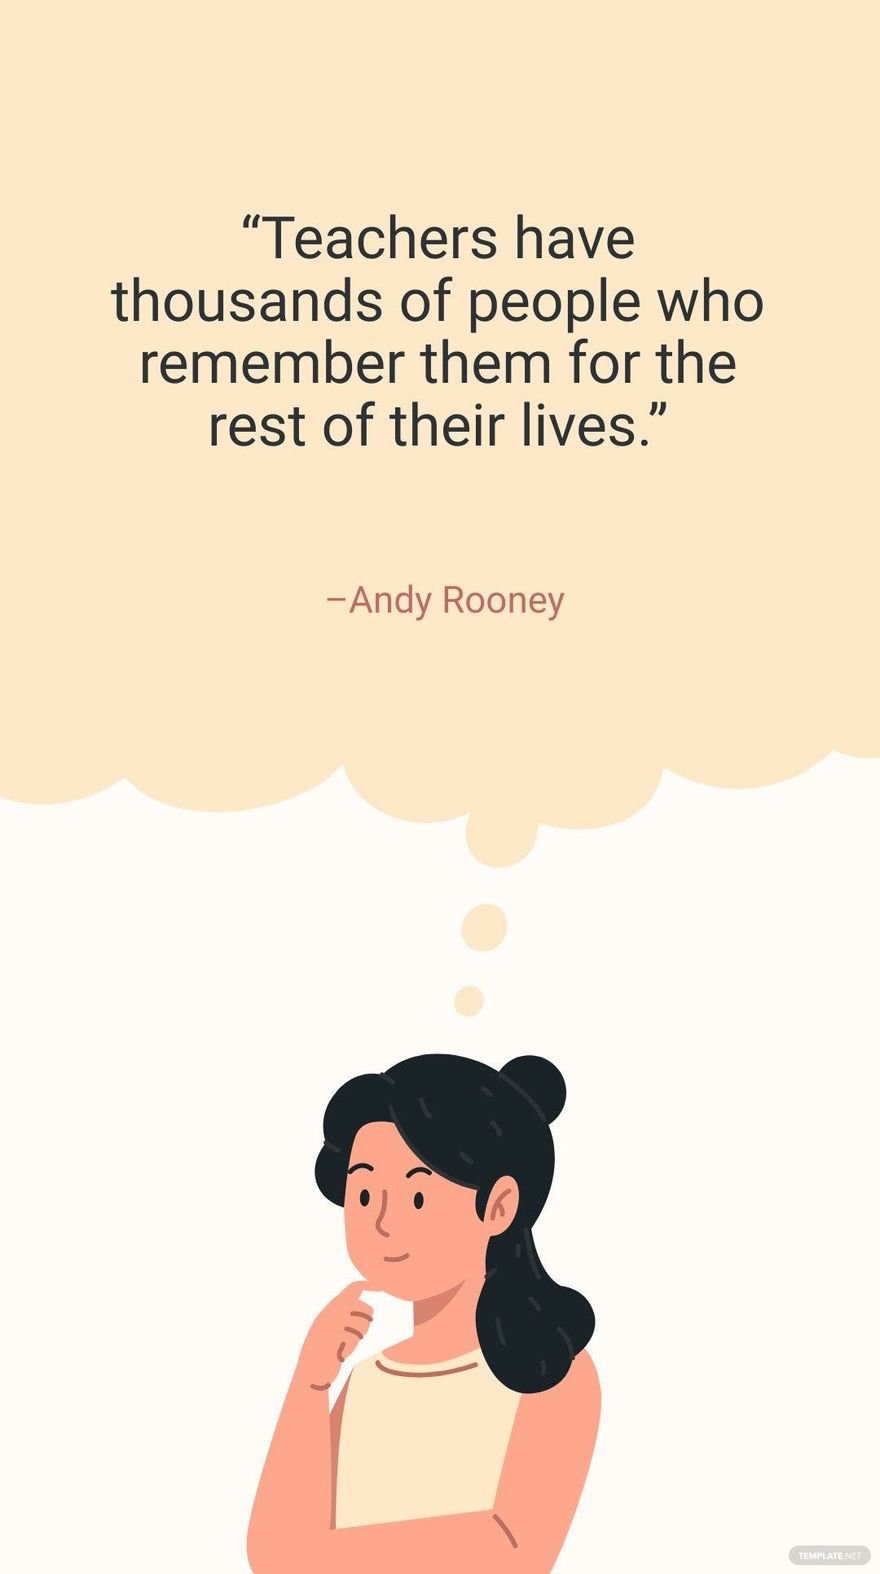 Free Andy Rooney - Teachers have thousands of people who remember them for the rest of their lives.